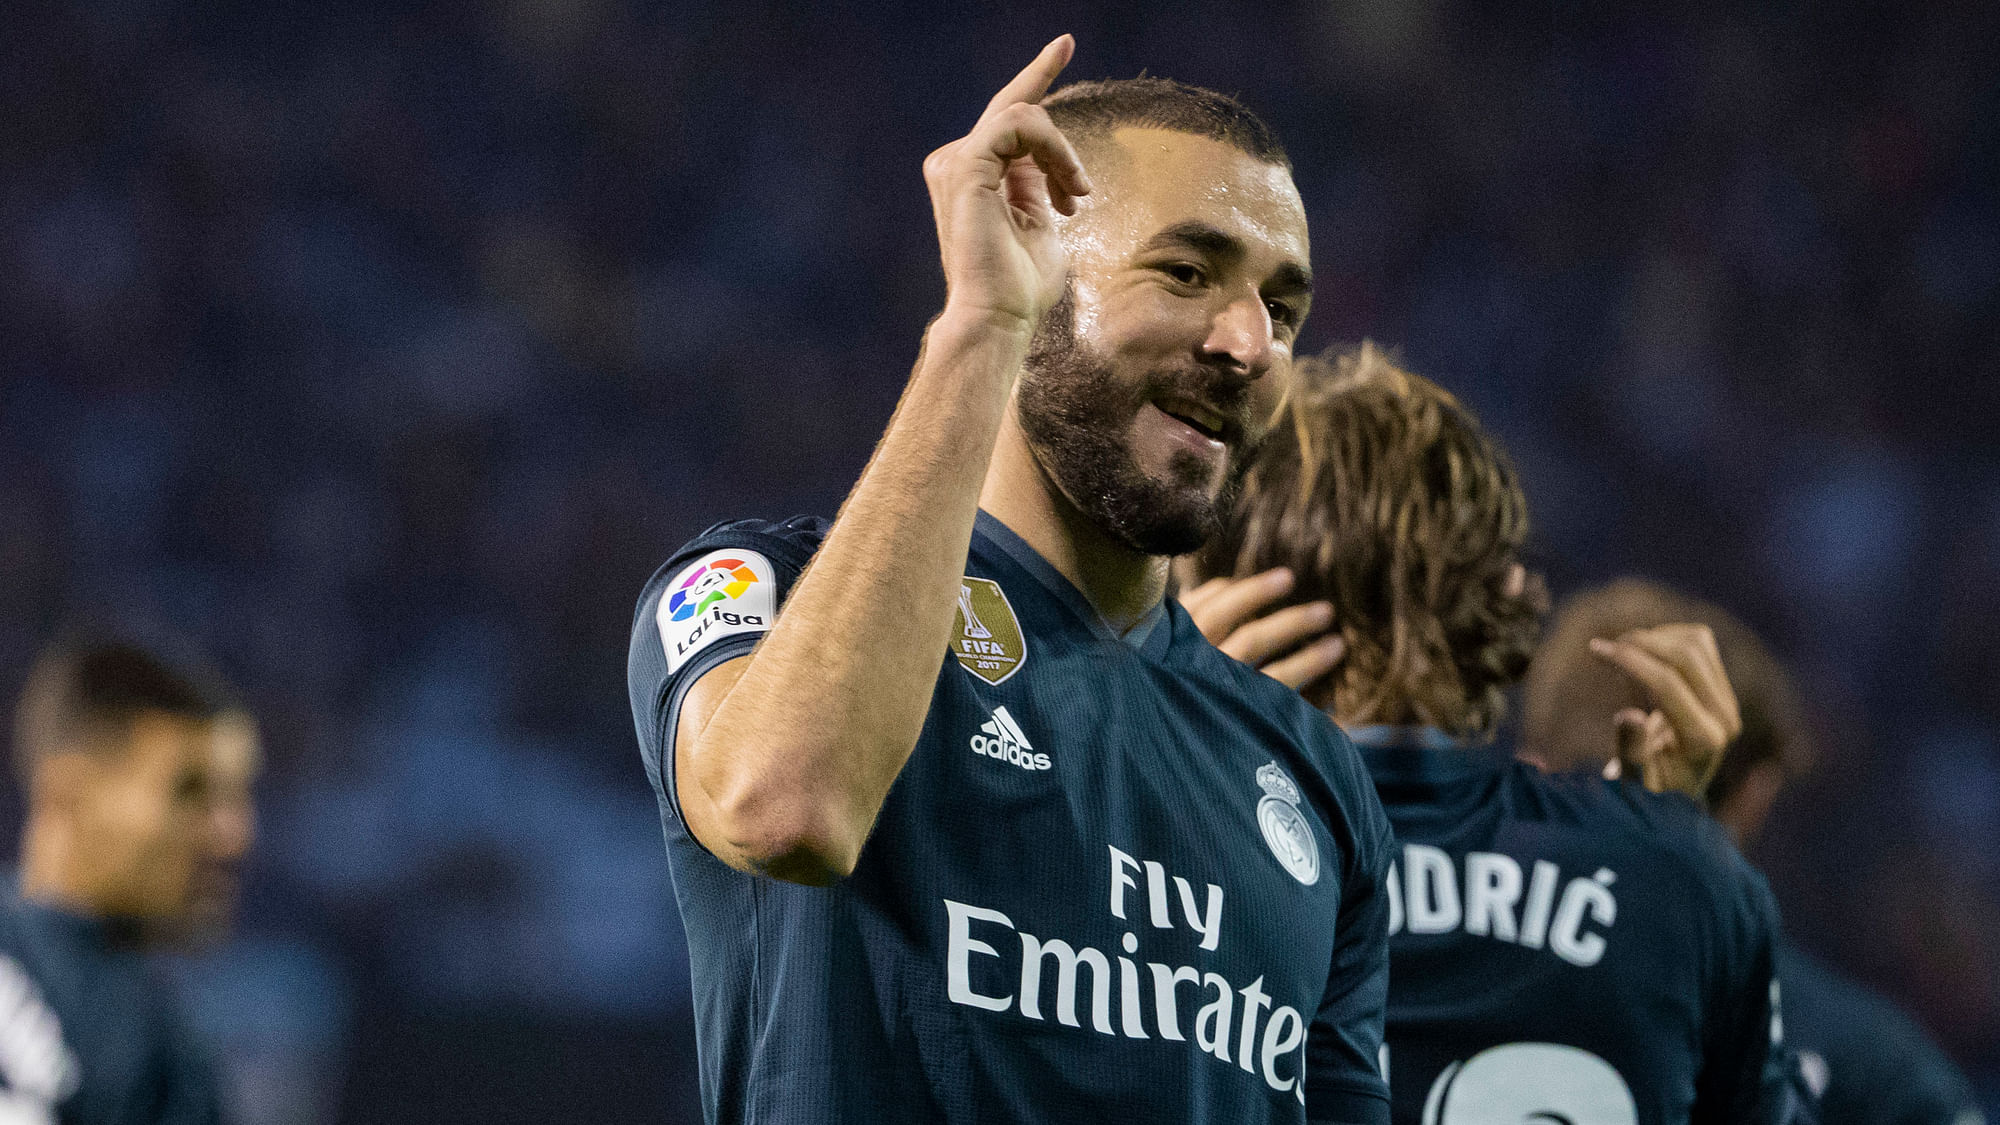 Karim Benzema has been leading the way for Real Madrid under new coach Santiago Solari.